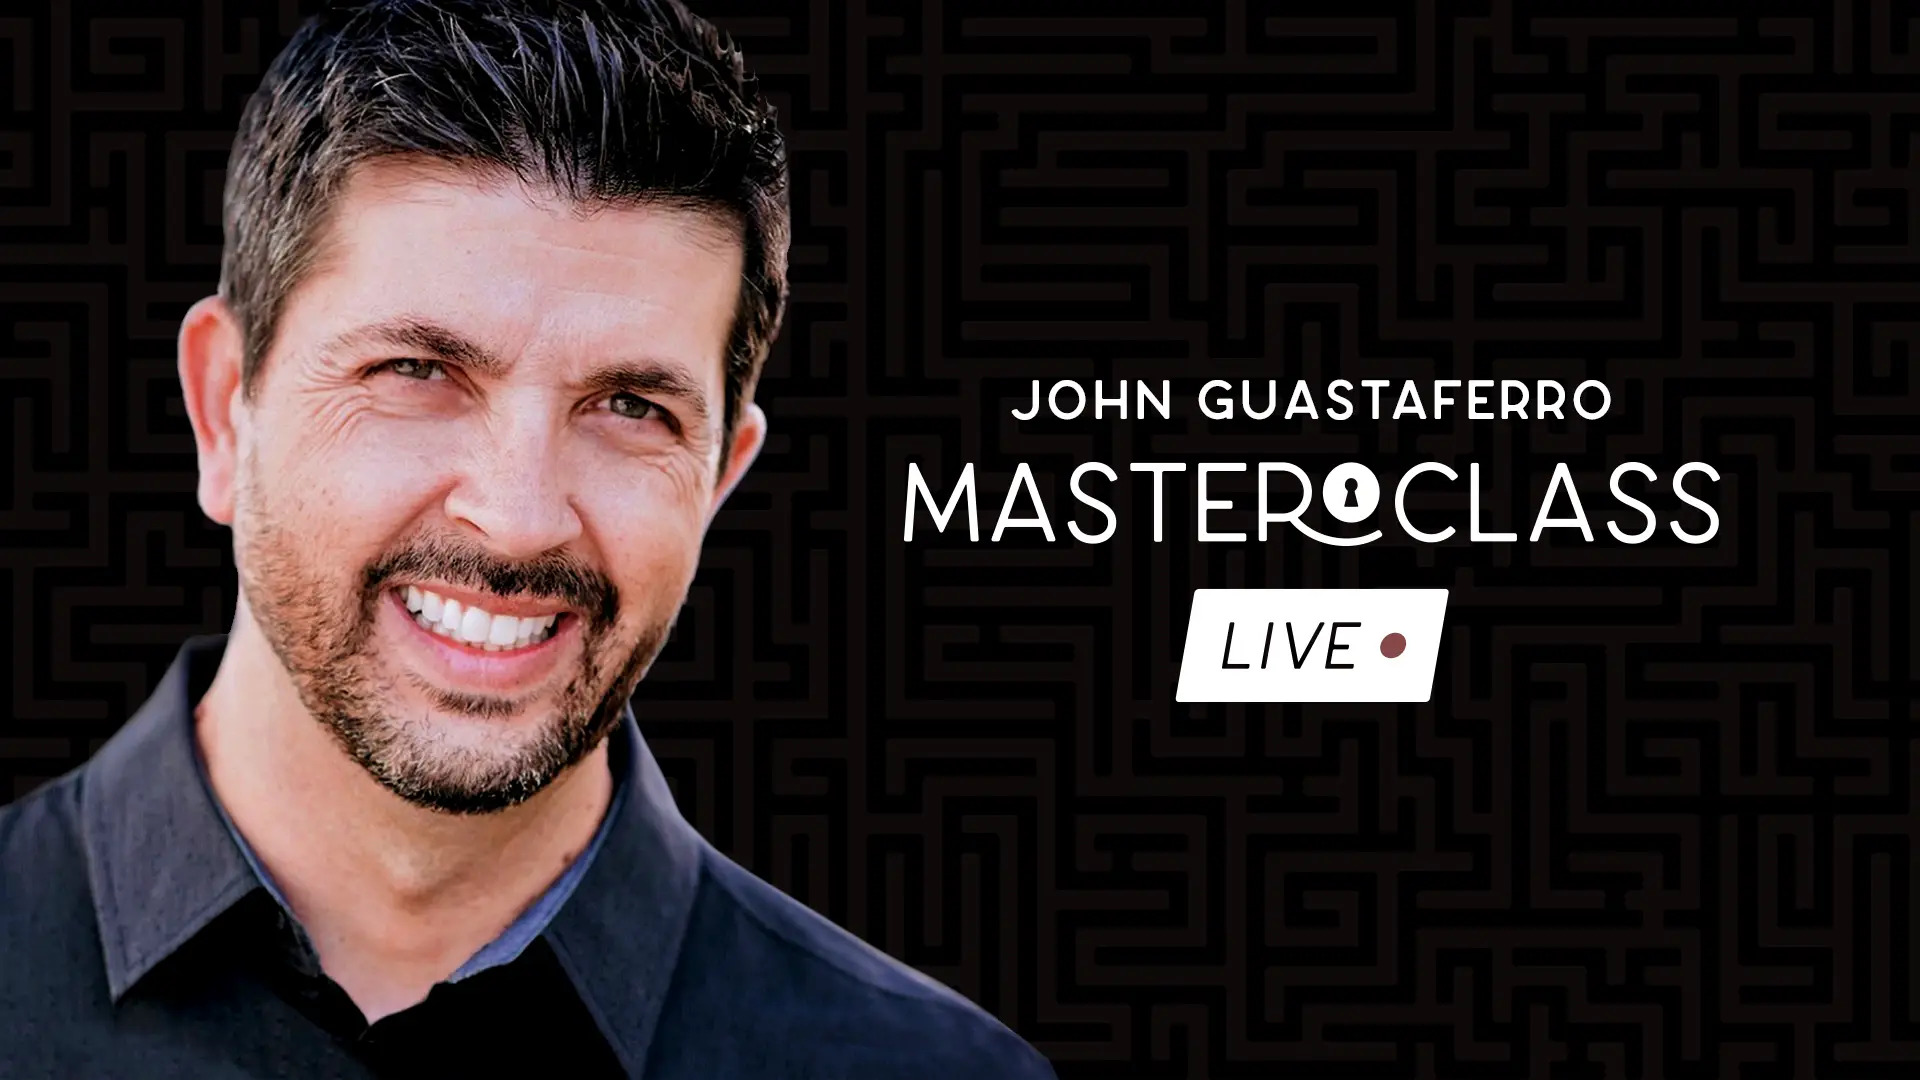 Masterclass Live Lecture by John Guastaferro (Week 2) (MP4 Video Download)